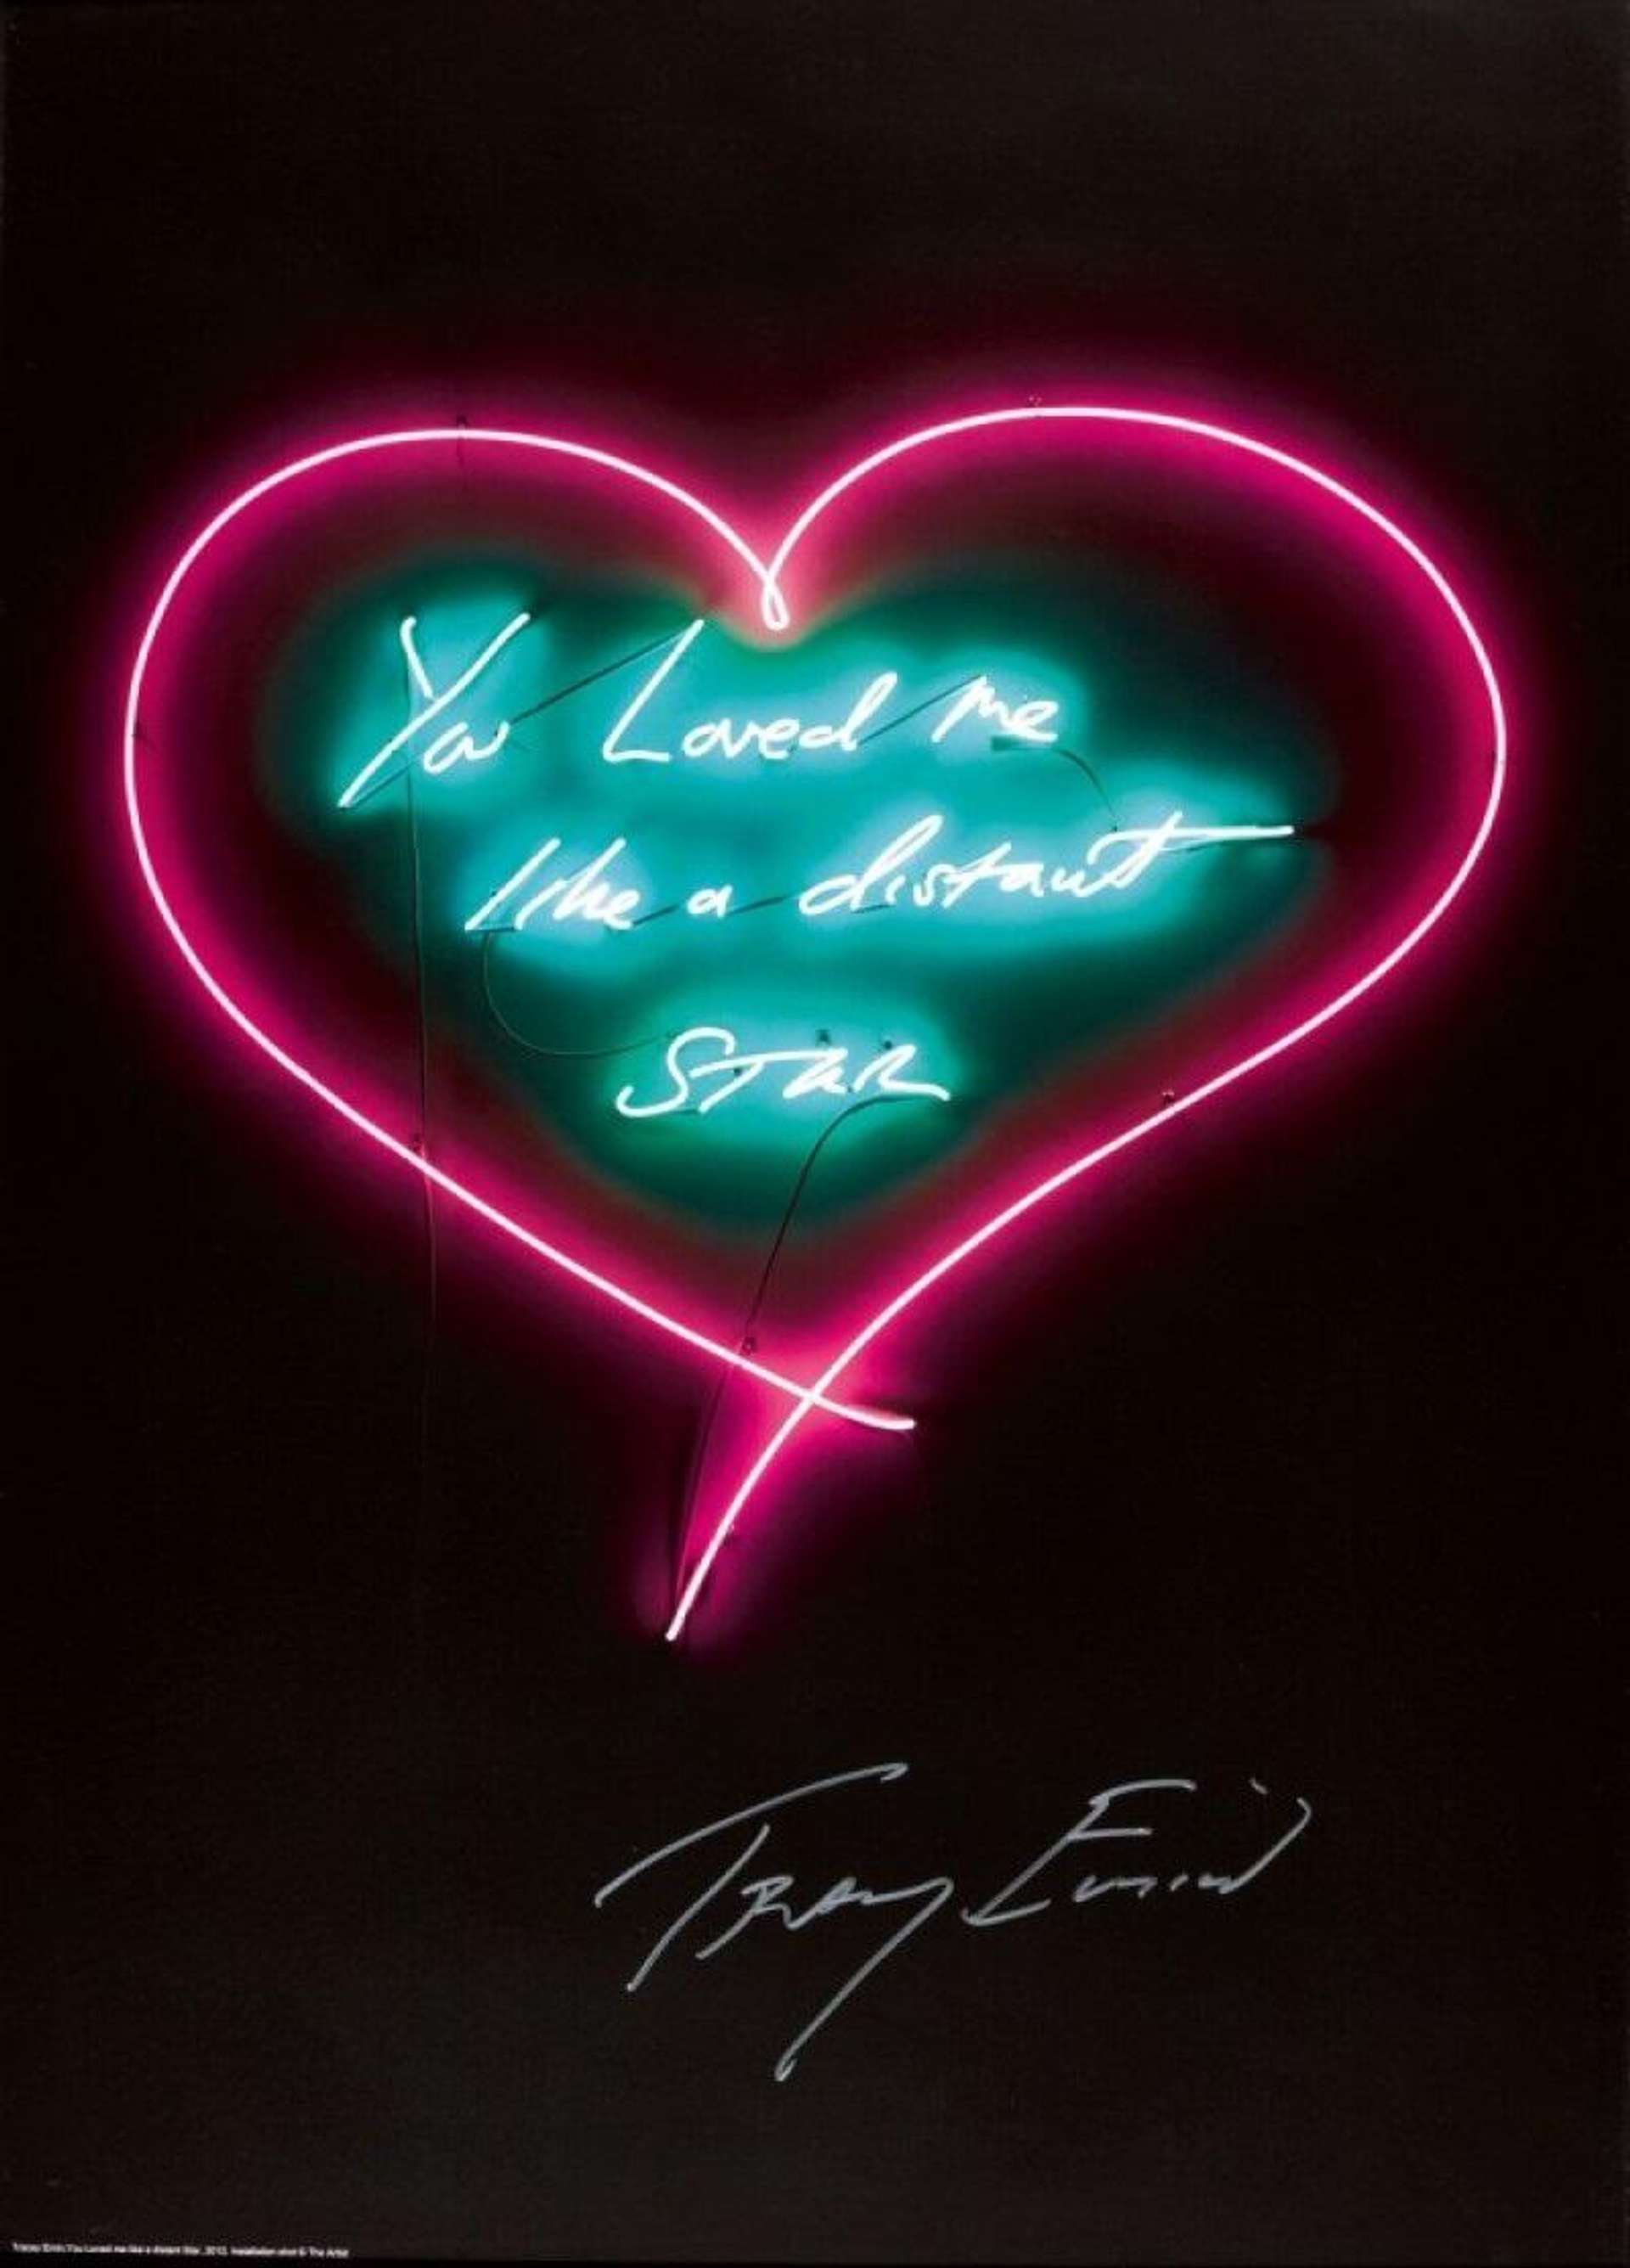 Tracey Emin: You Loved Me Like A Distant Star - Signed Print